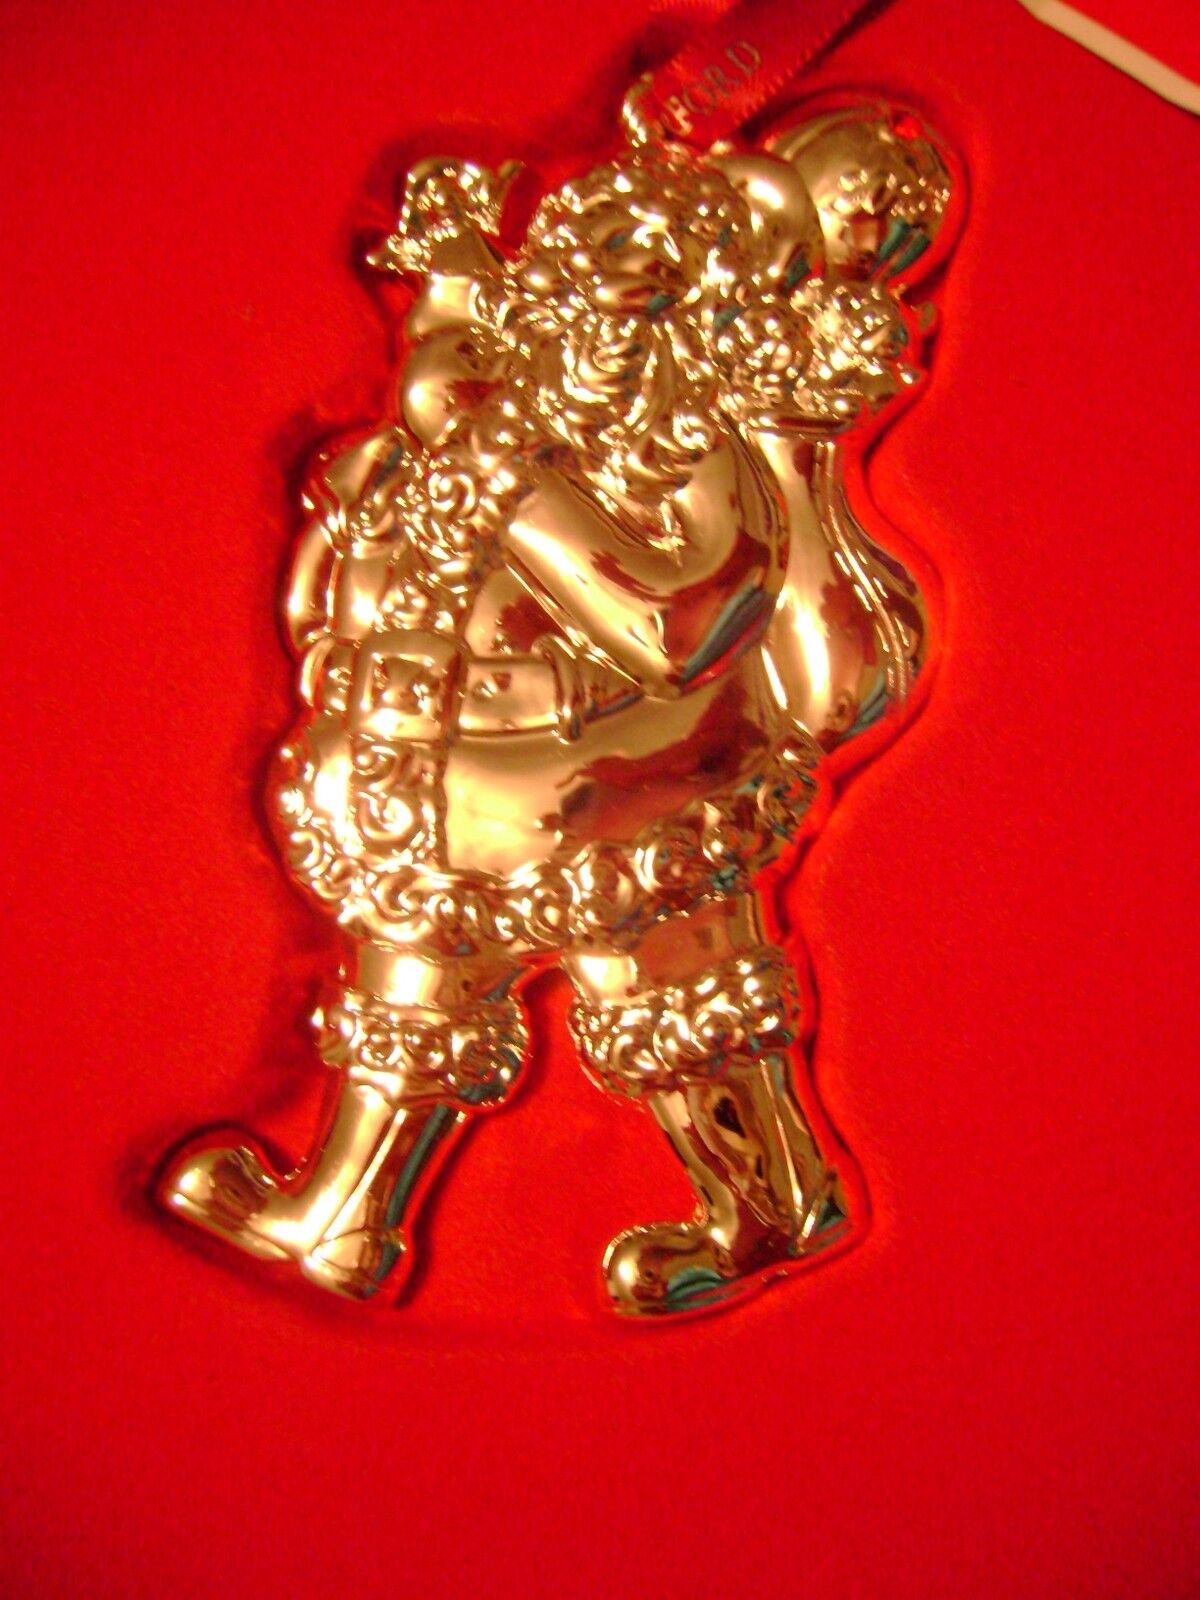 WATERFORD 2013 ANNUAL SANTA ORNAMENT~~SILVER PLATED ORNAMENT SERIES